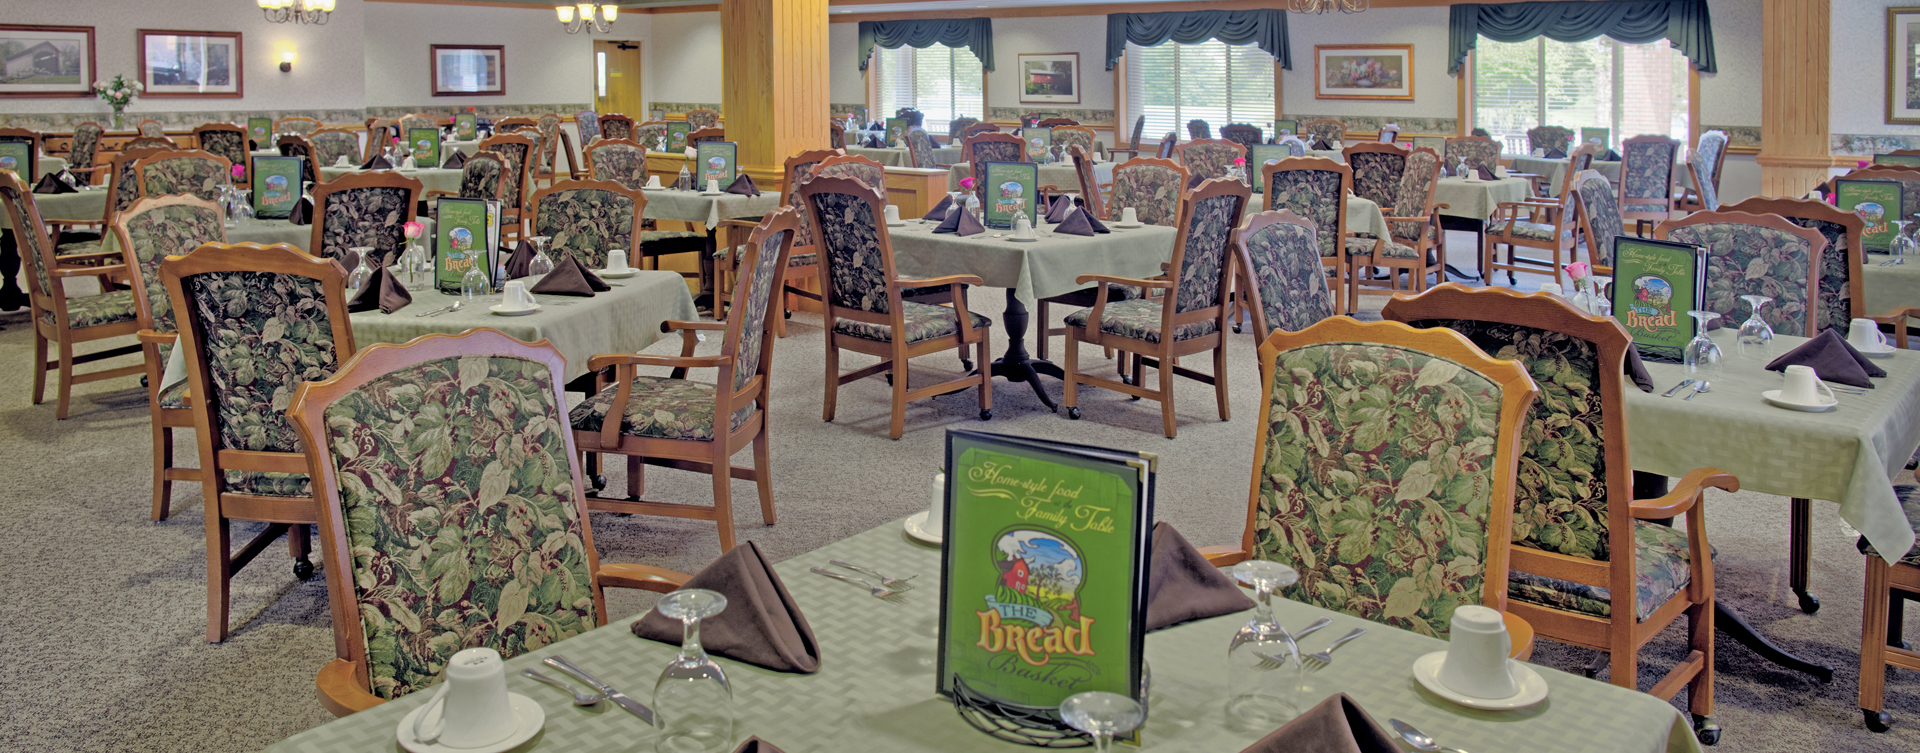 Enjoy restaurant -style meals served three times a day in our dining room at Bickford of Lancaster